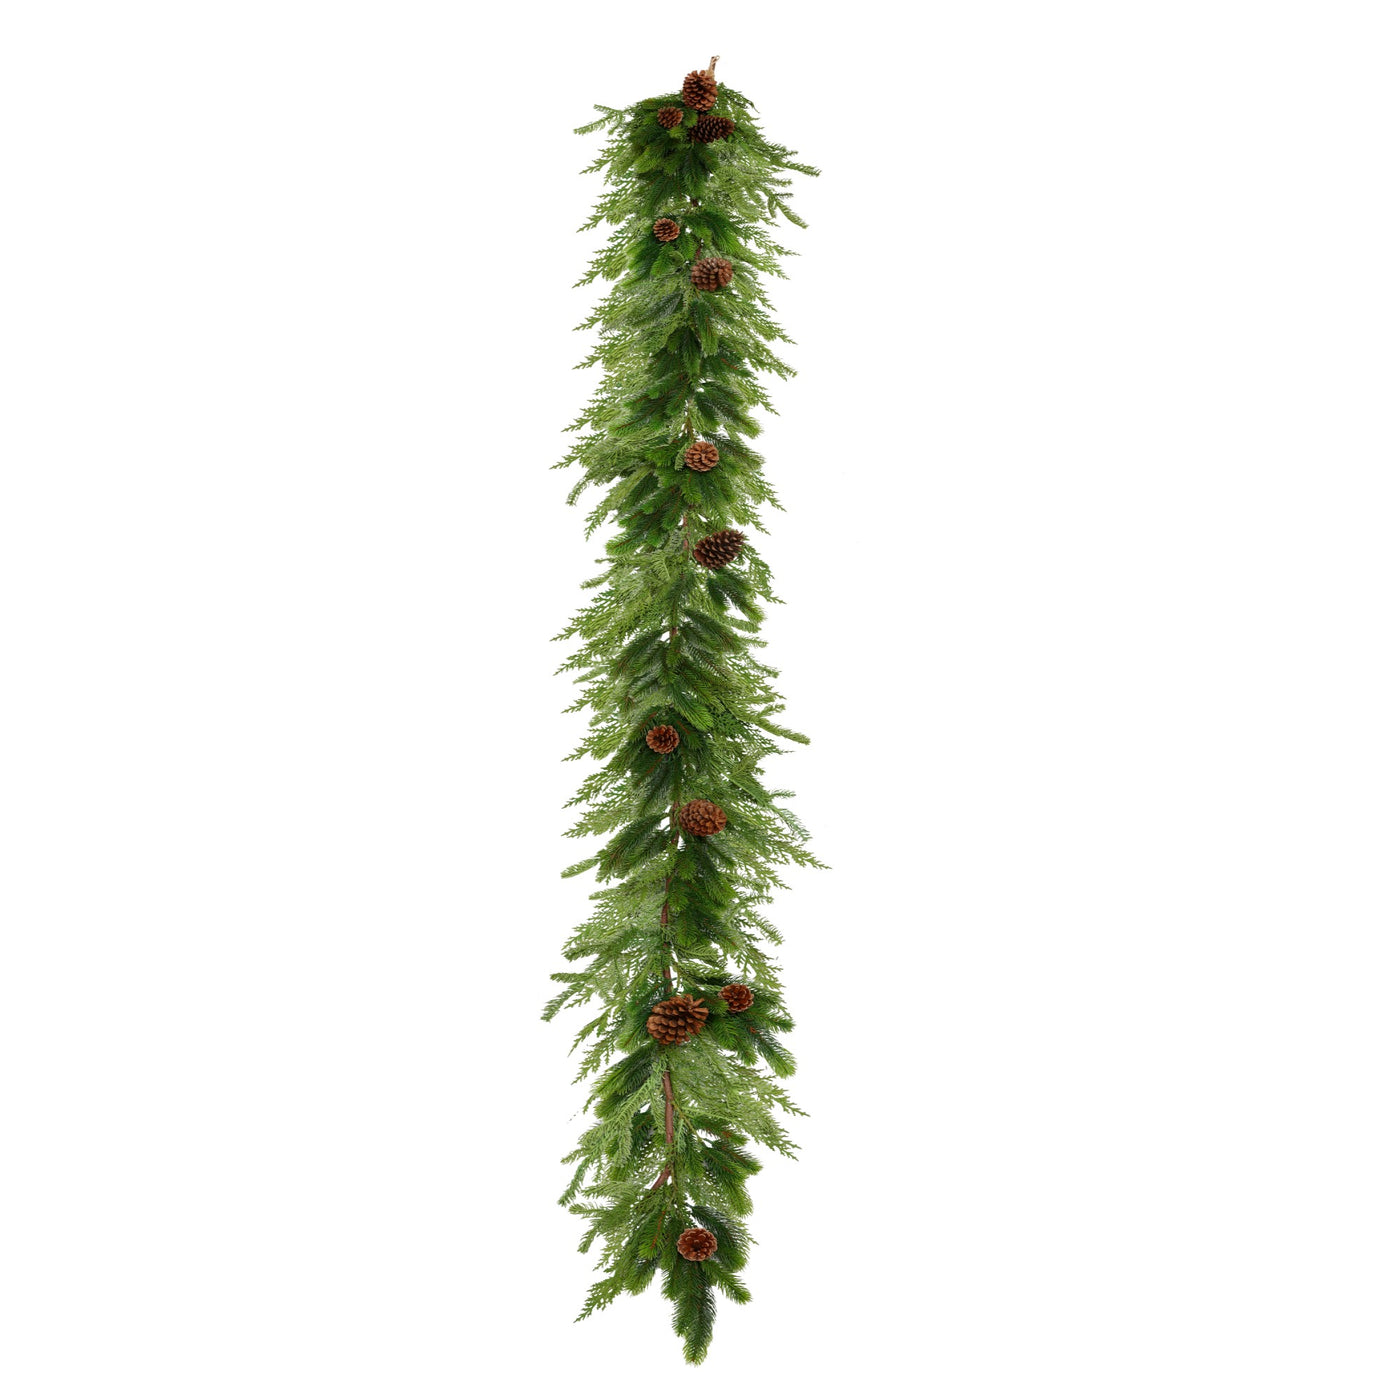 Beautiful realistic upscale pine garland for holidays